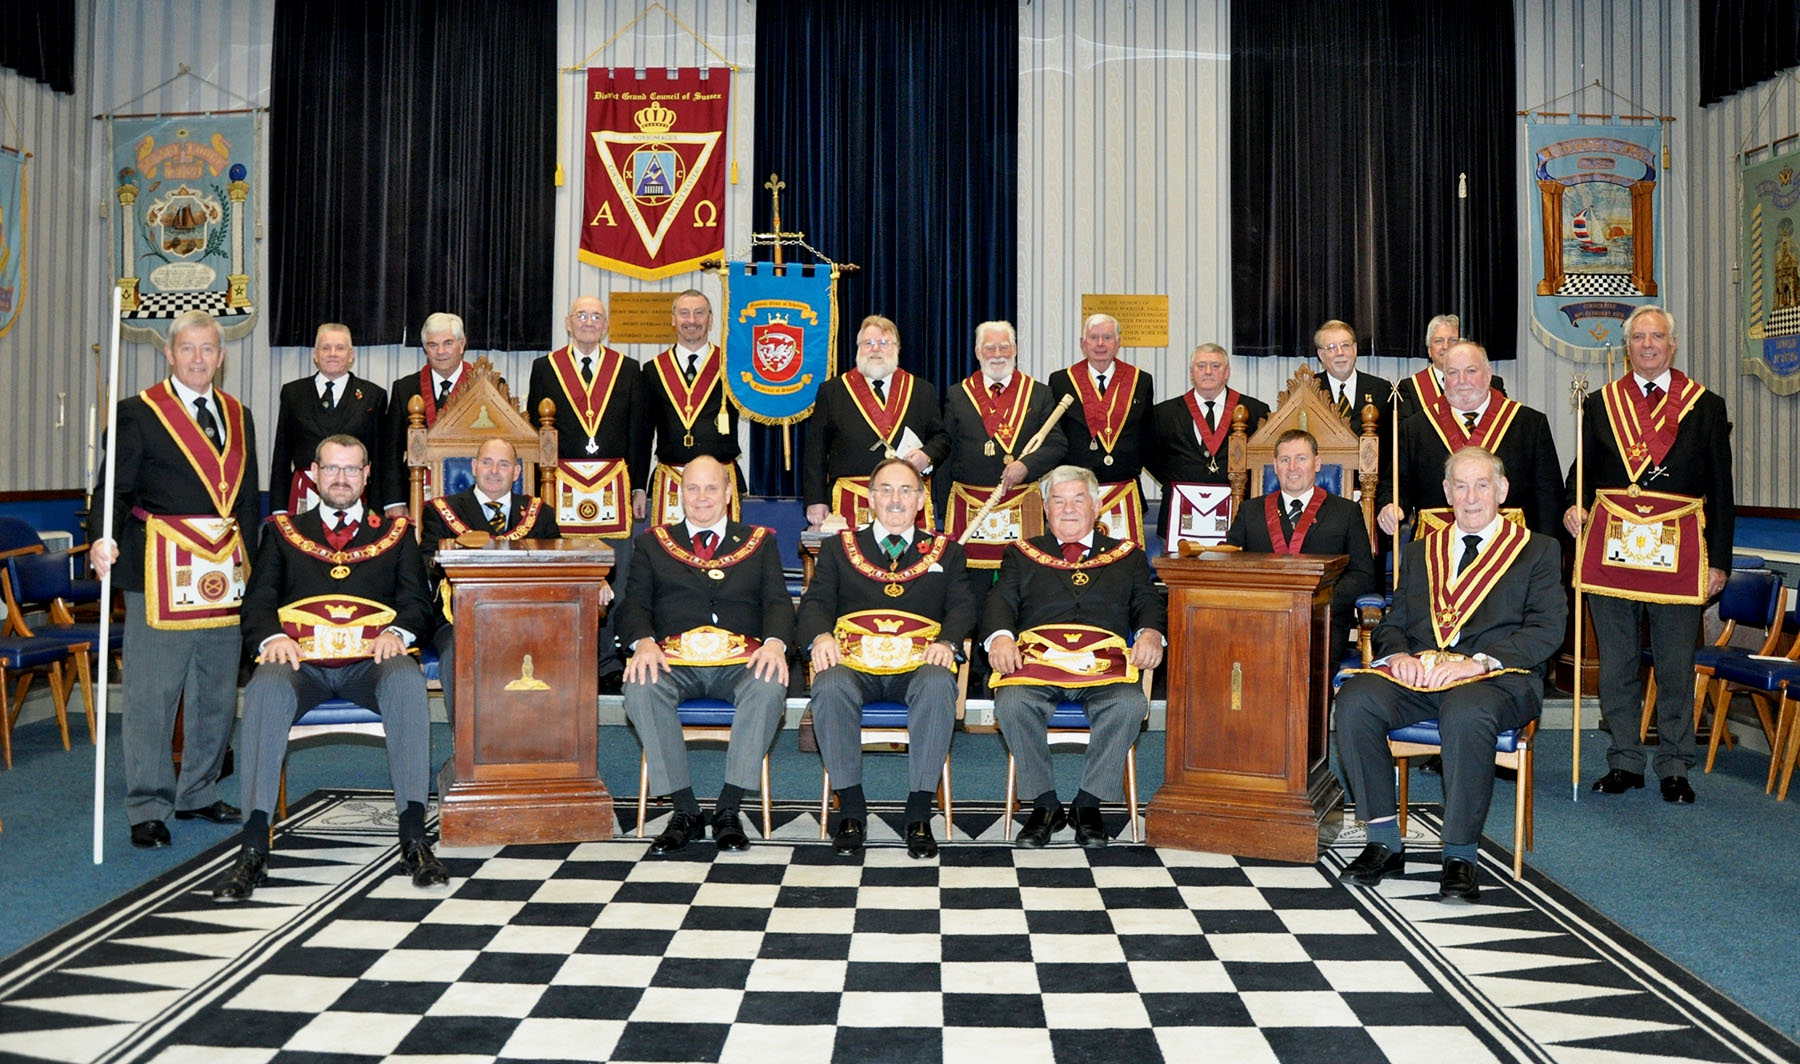 Executive Visit by the Provincial Grand Master to the Court of Prince Edmund